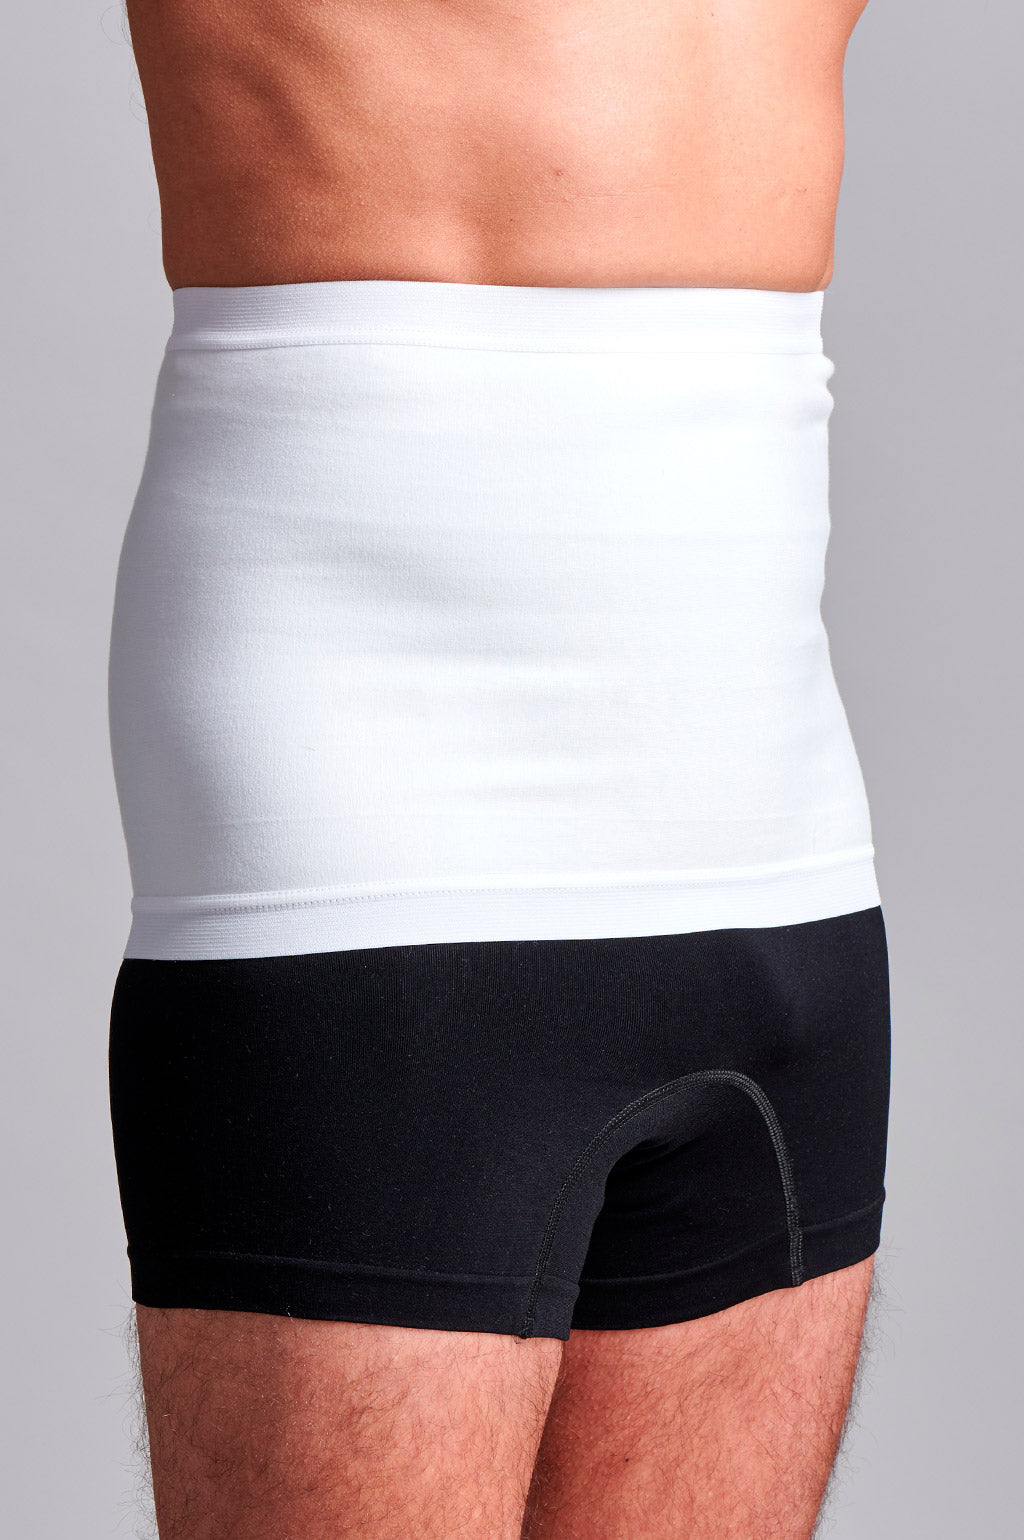 High Waist Female Support Girdle - Suportx